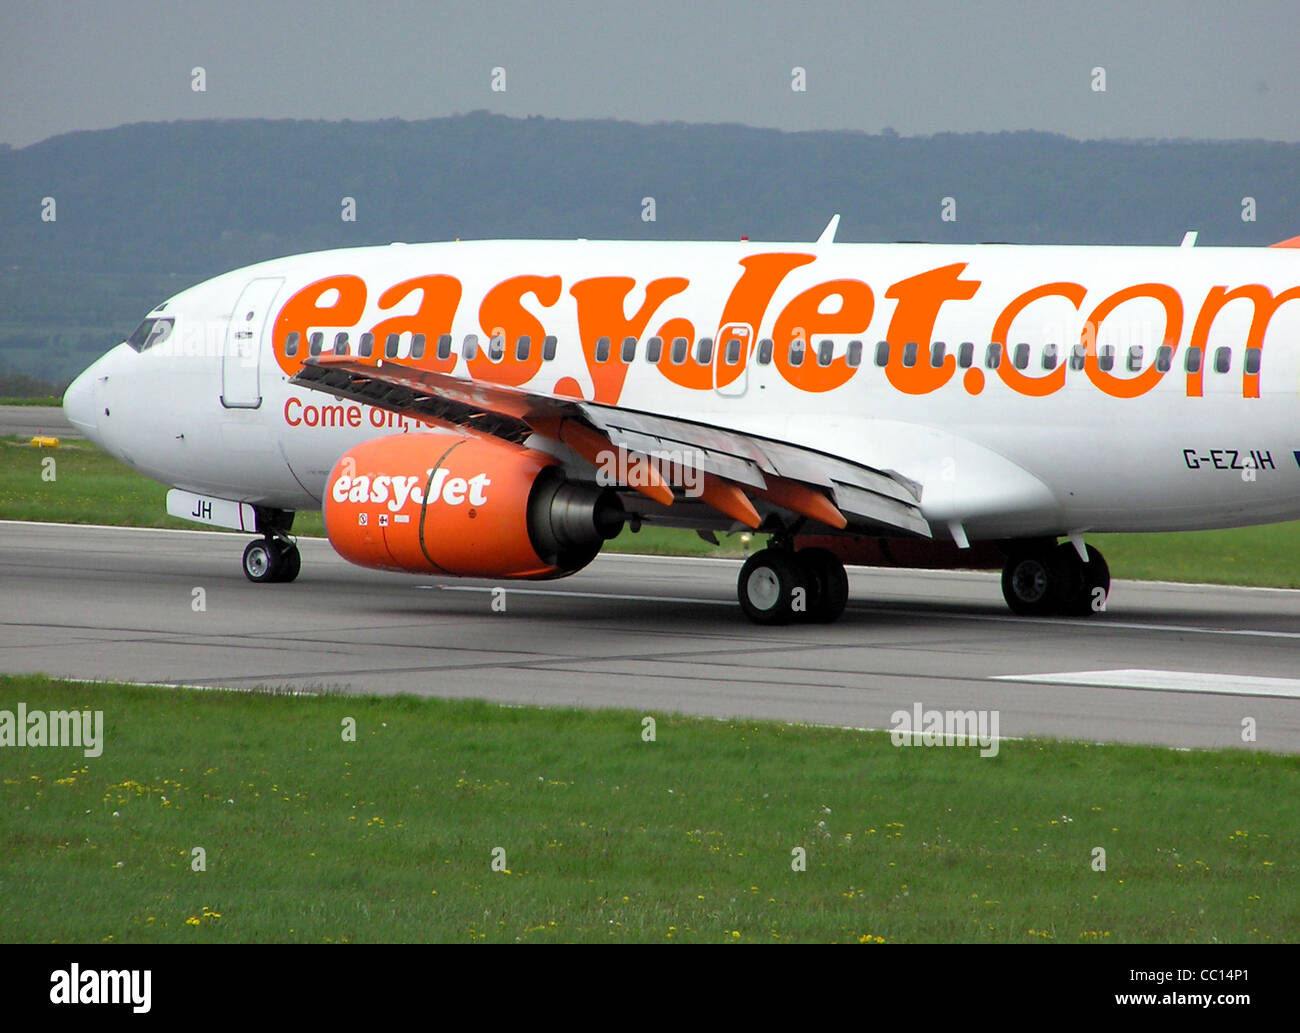 Easyjet Boeing 737-700 (G-EZJH) at the end of the landing run at Bristol International Airport, England. Stock Photo